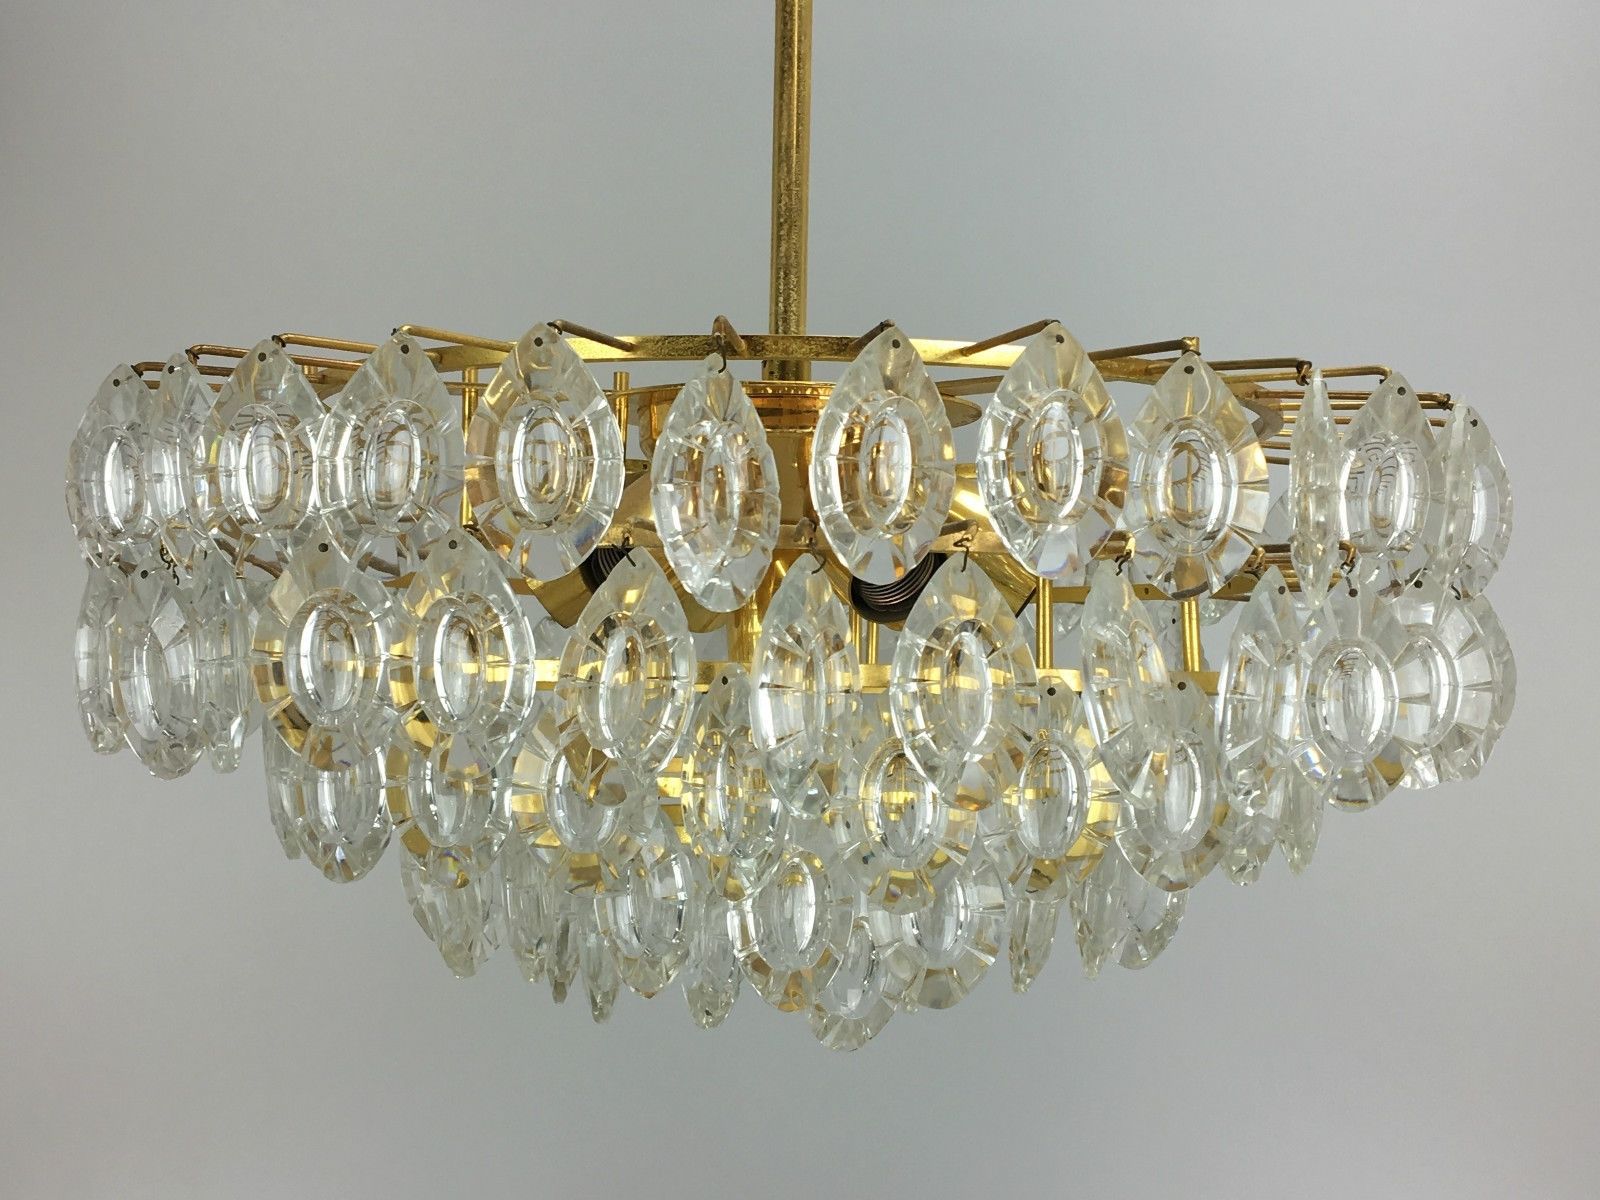 Brass & Glass Chandelier From Kinkeldey, 1960s For Sale At Pamono Intended For 2018 Brass And Glass Chandelier (View 13 of 15)